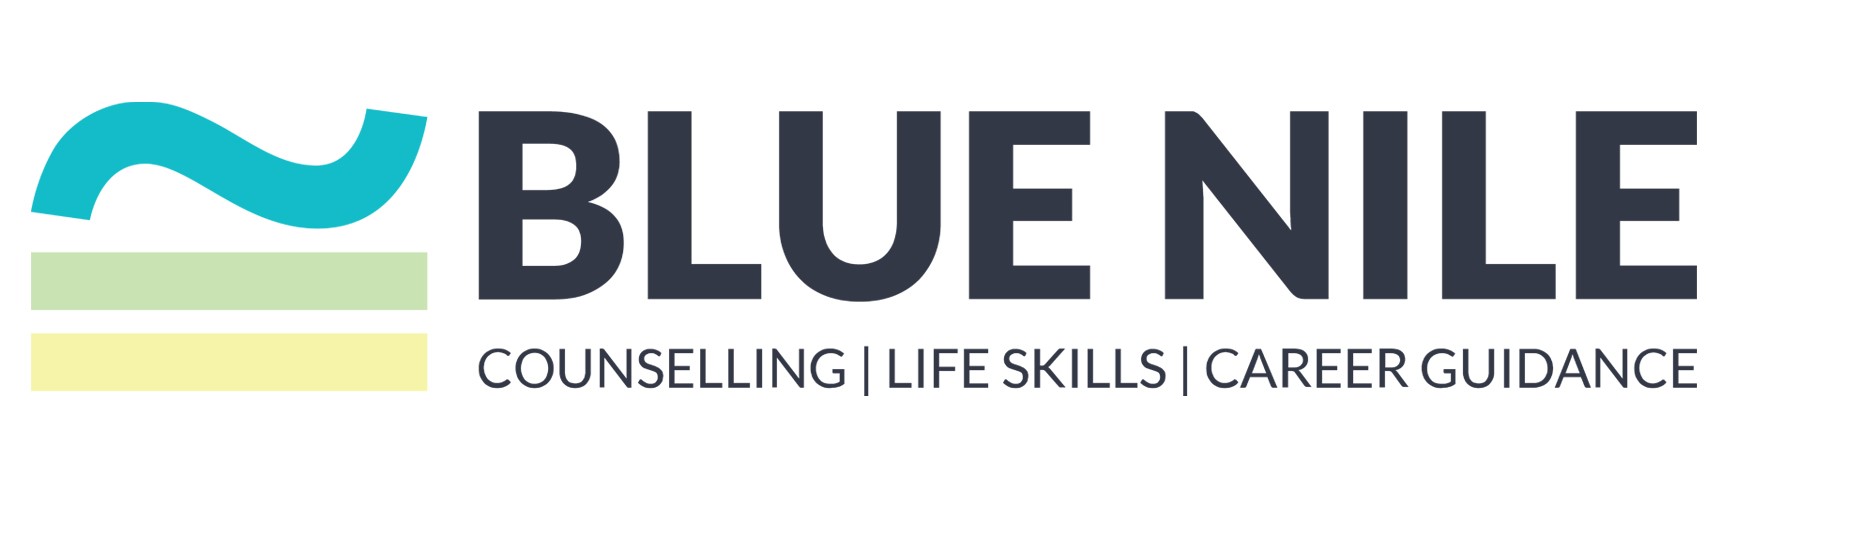 Blue Nile Counselling Life Skills And Career Guidance